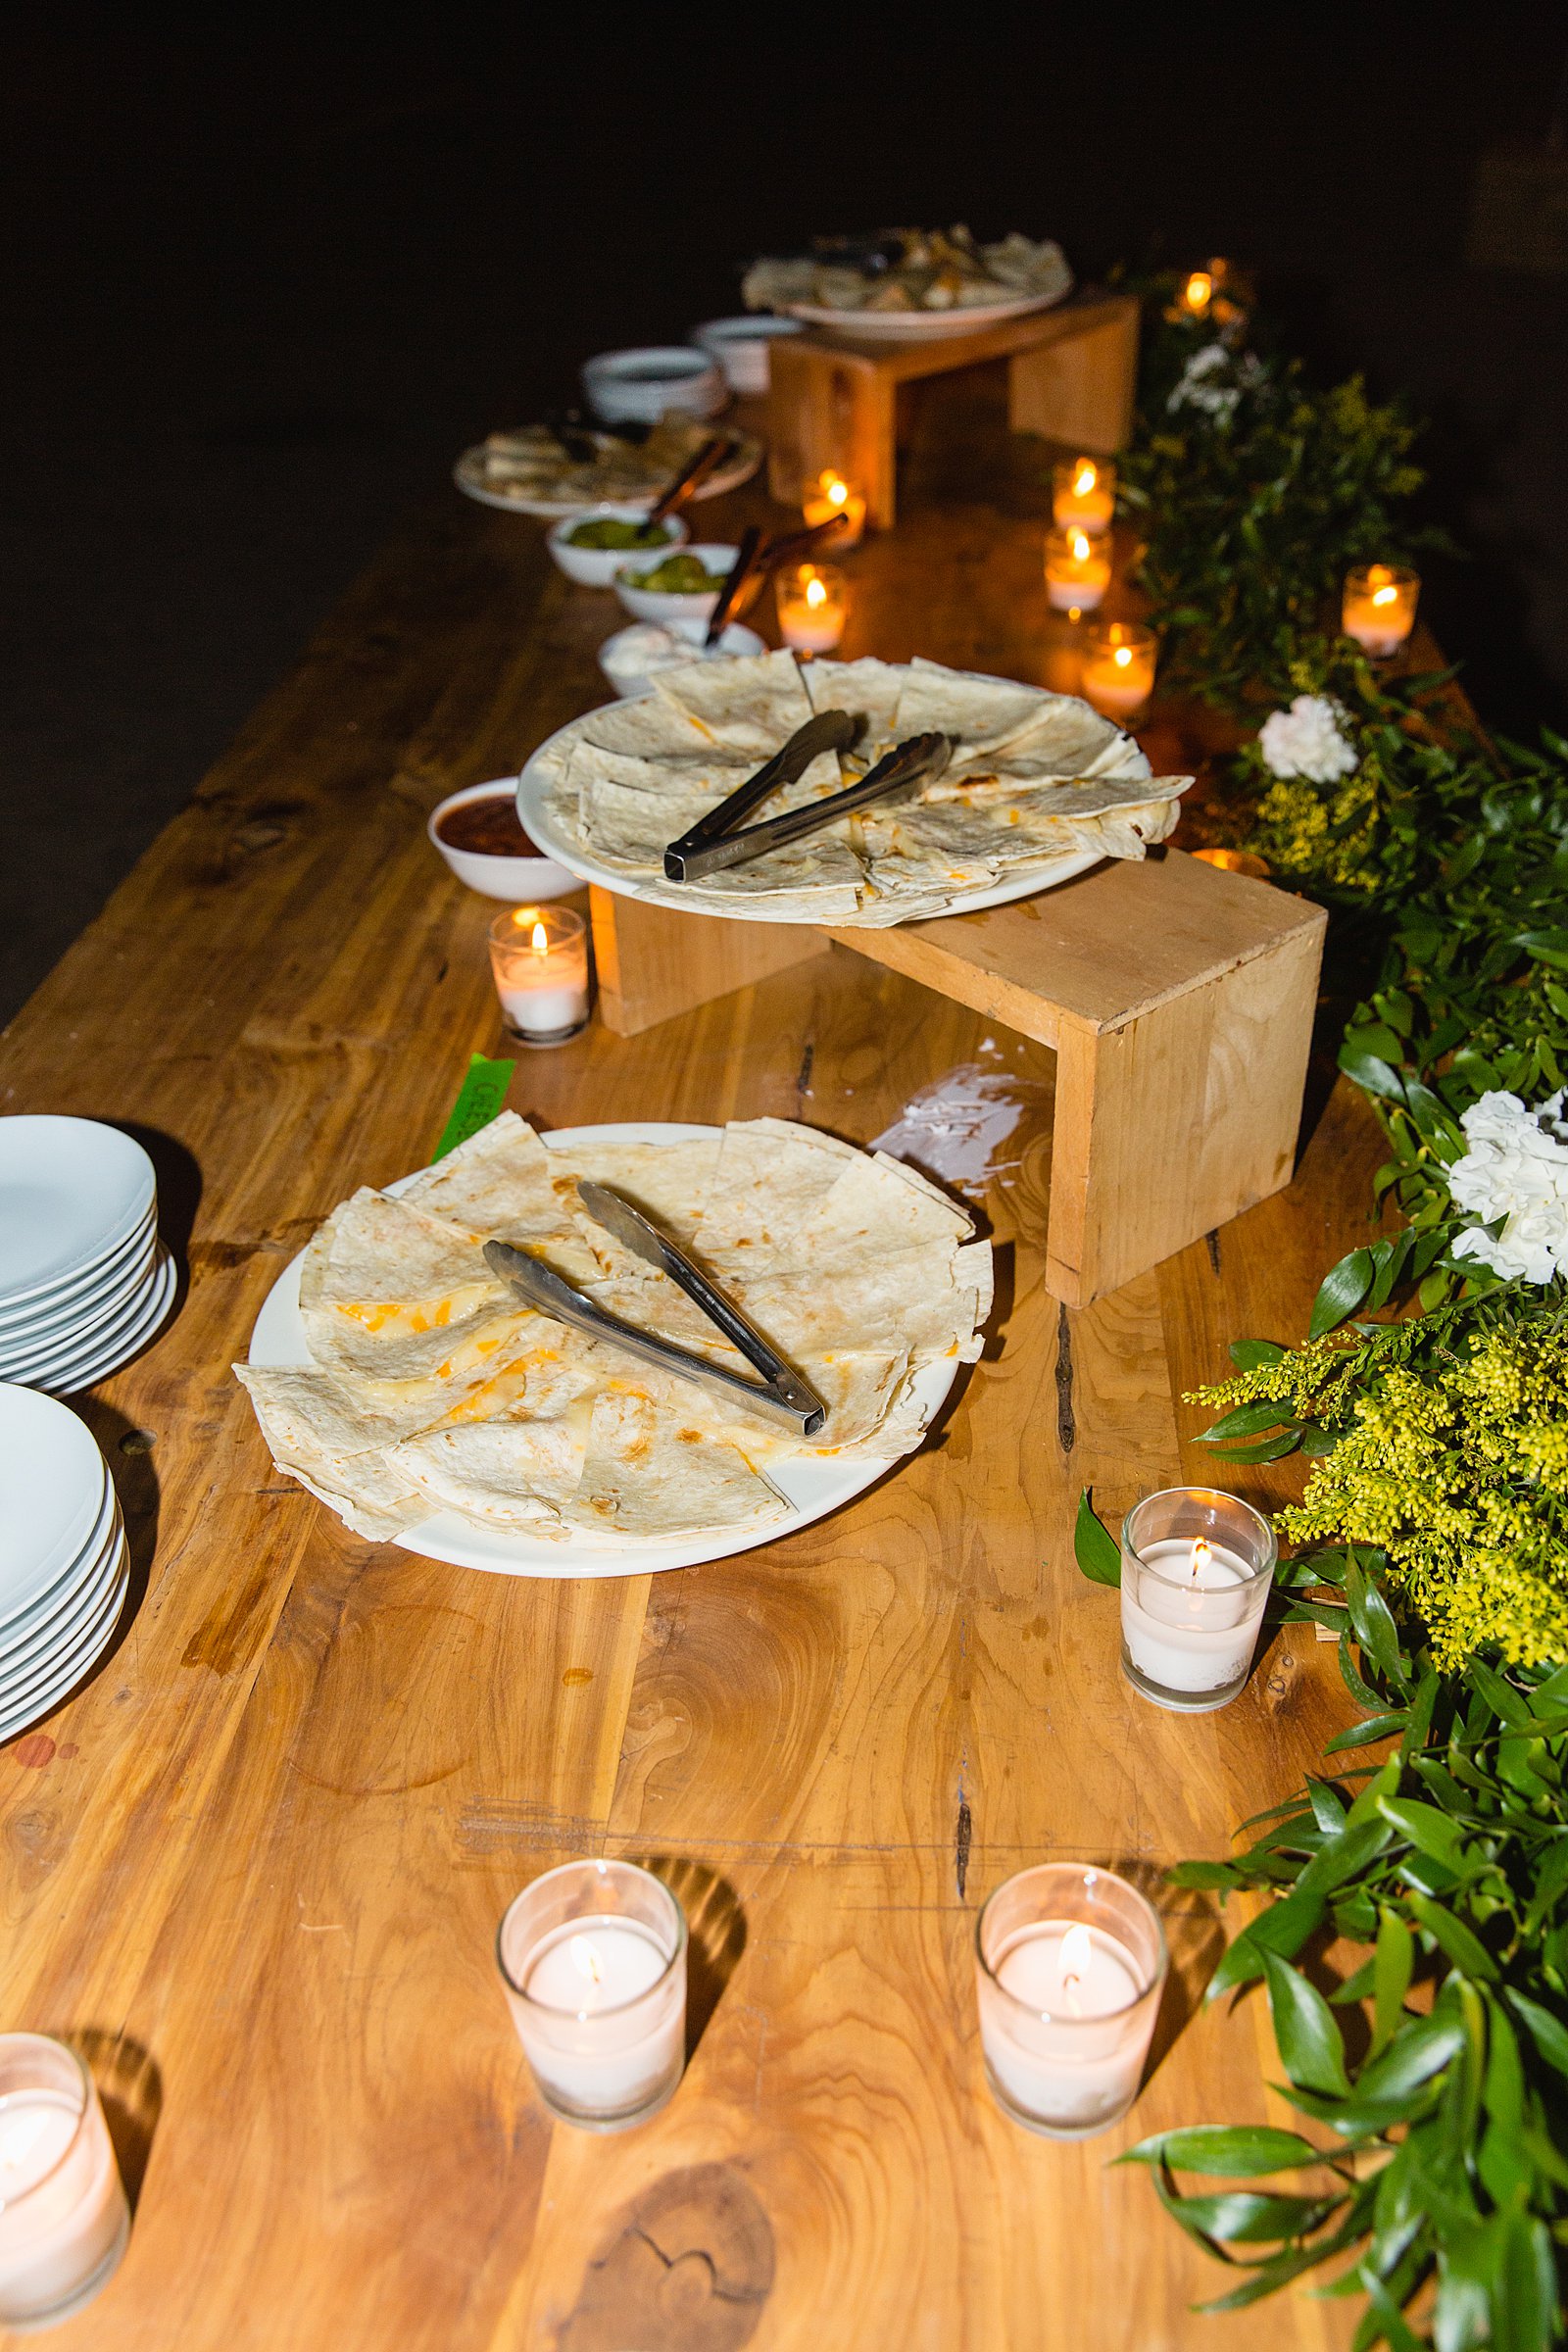 Late night snacks of quesadilla at a Cloth and Flame wedding reception by Phoenix wedding photographer PMA Photography.